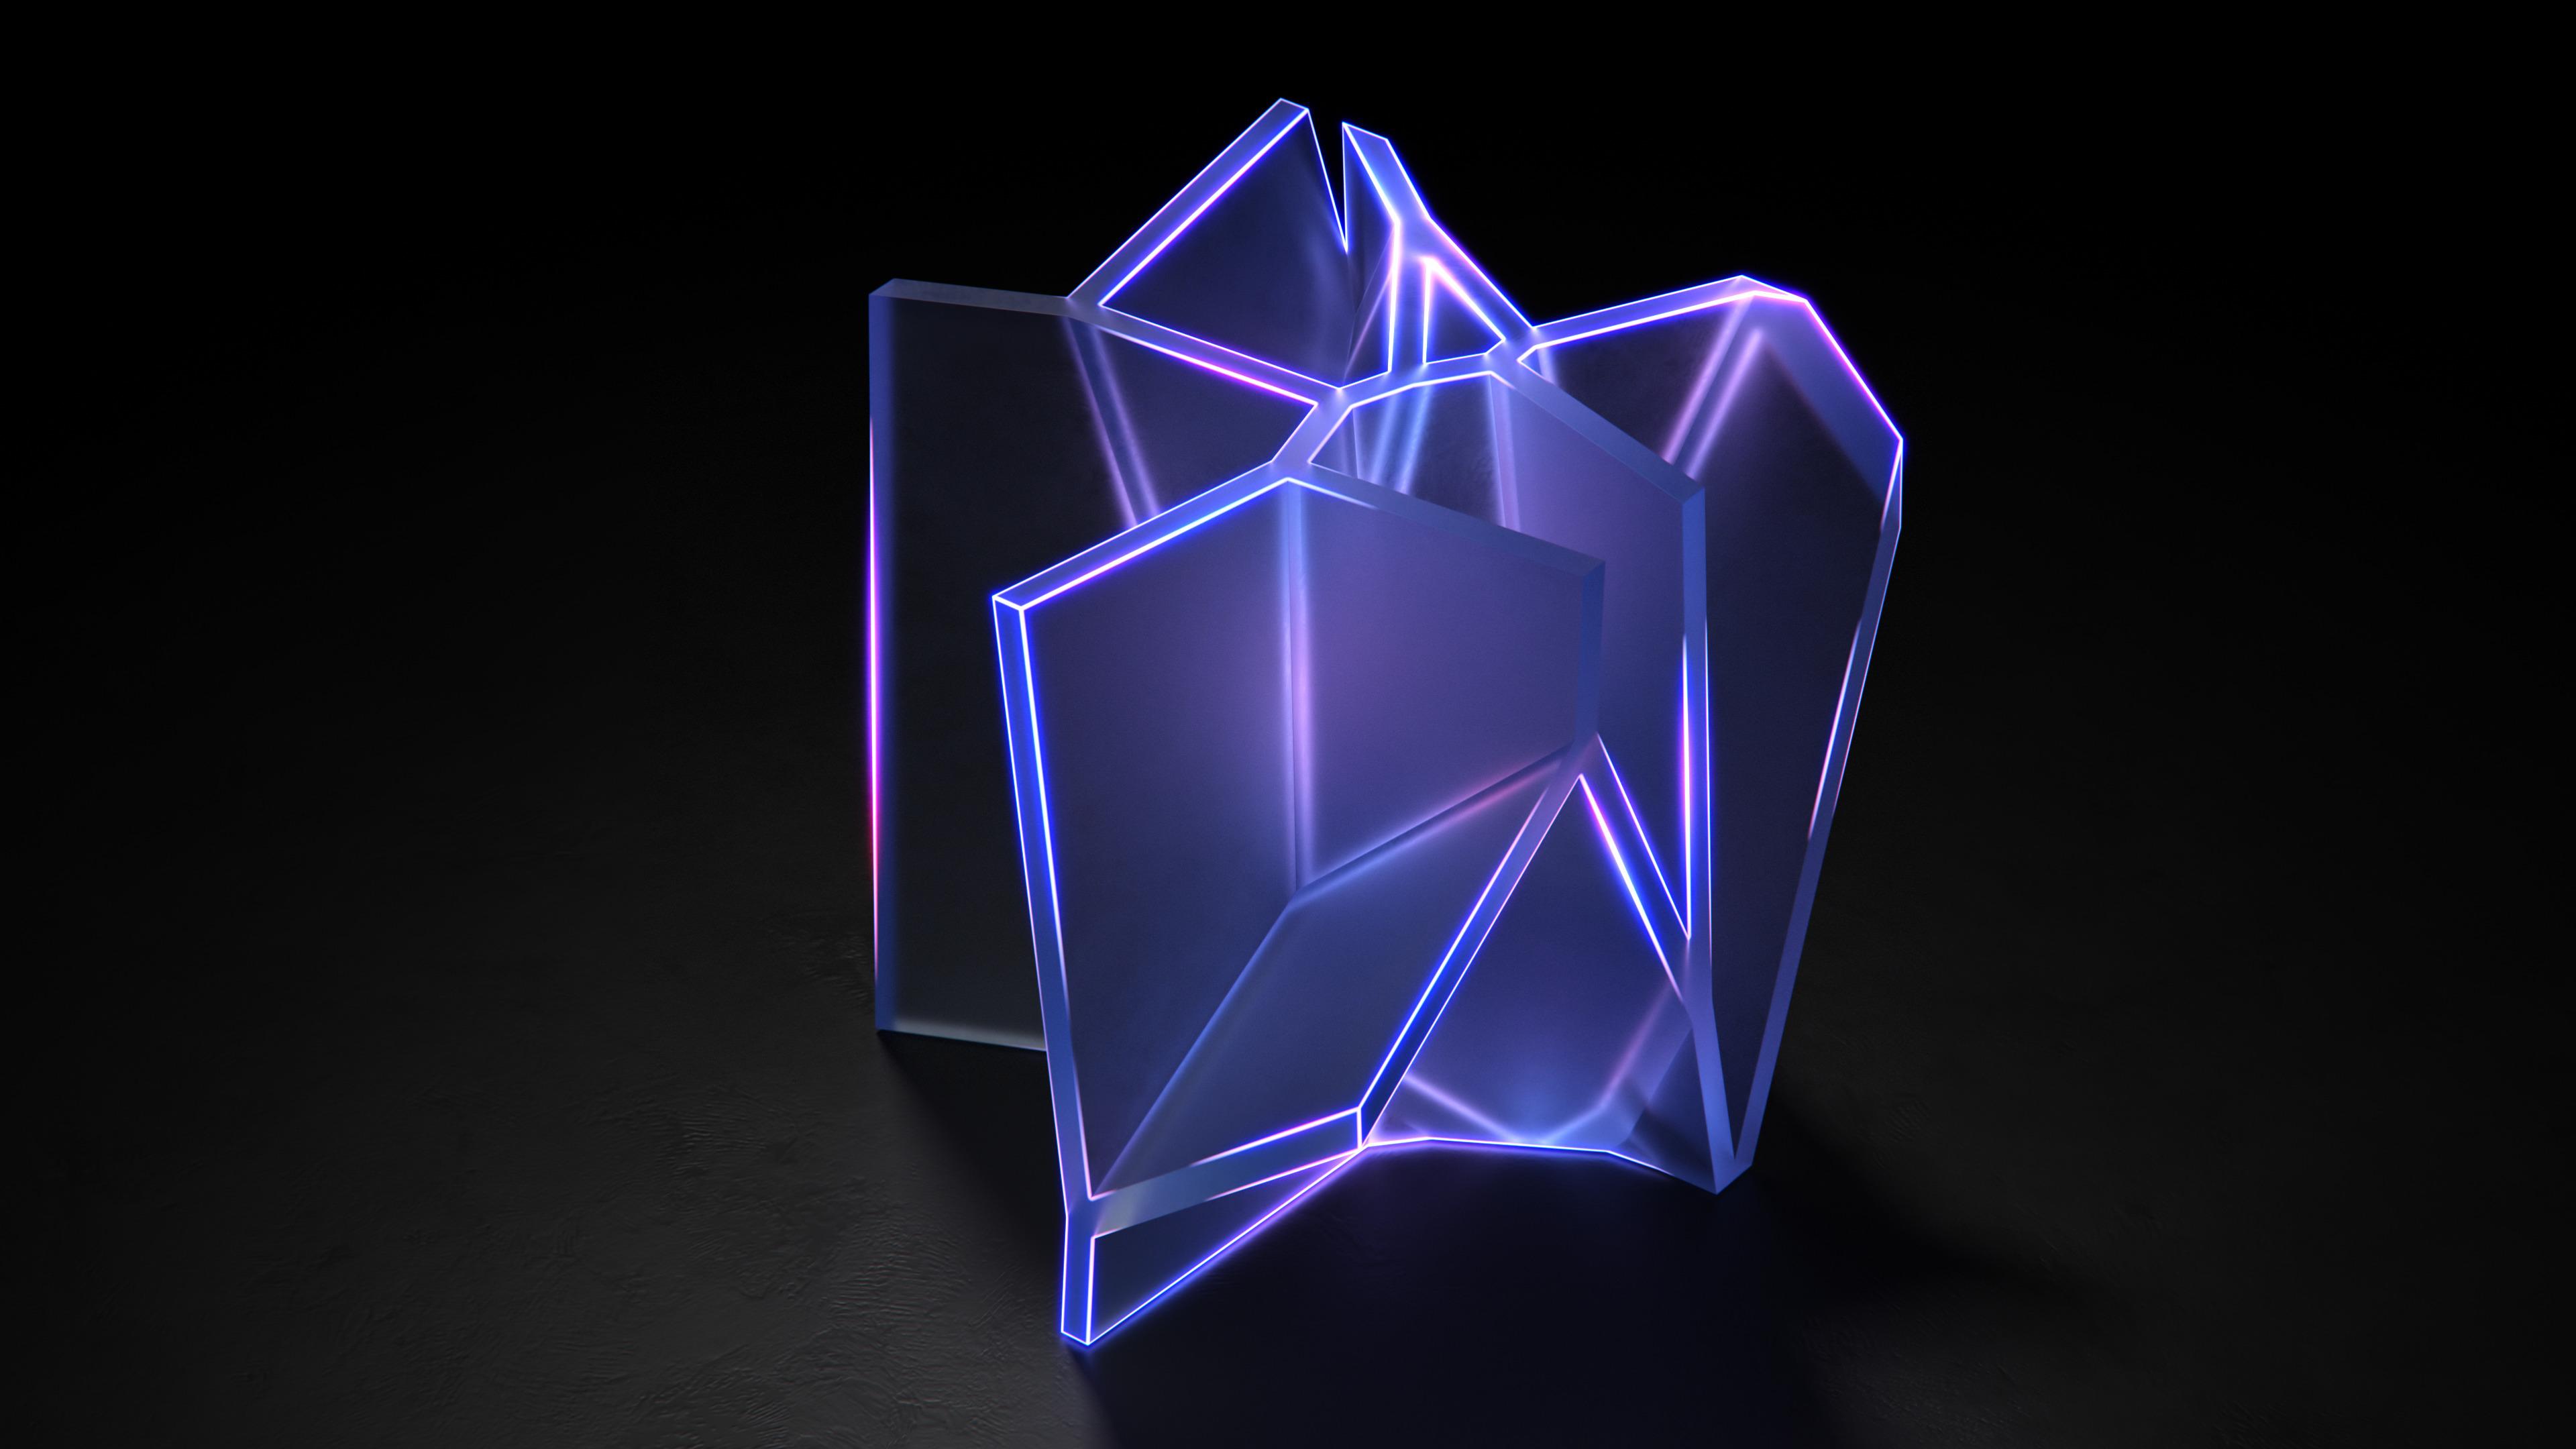 Download 3840x2400 wallpaper abstract, glowing glass, geometric